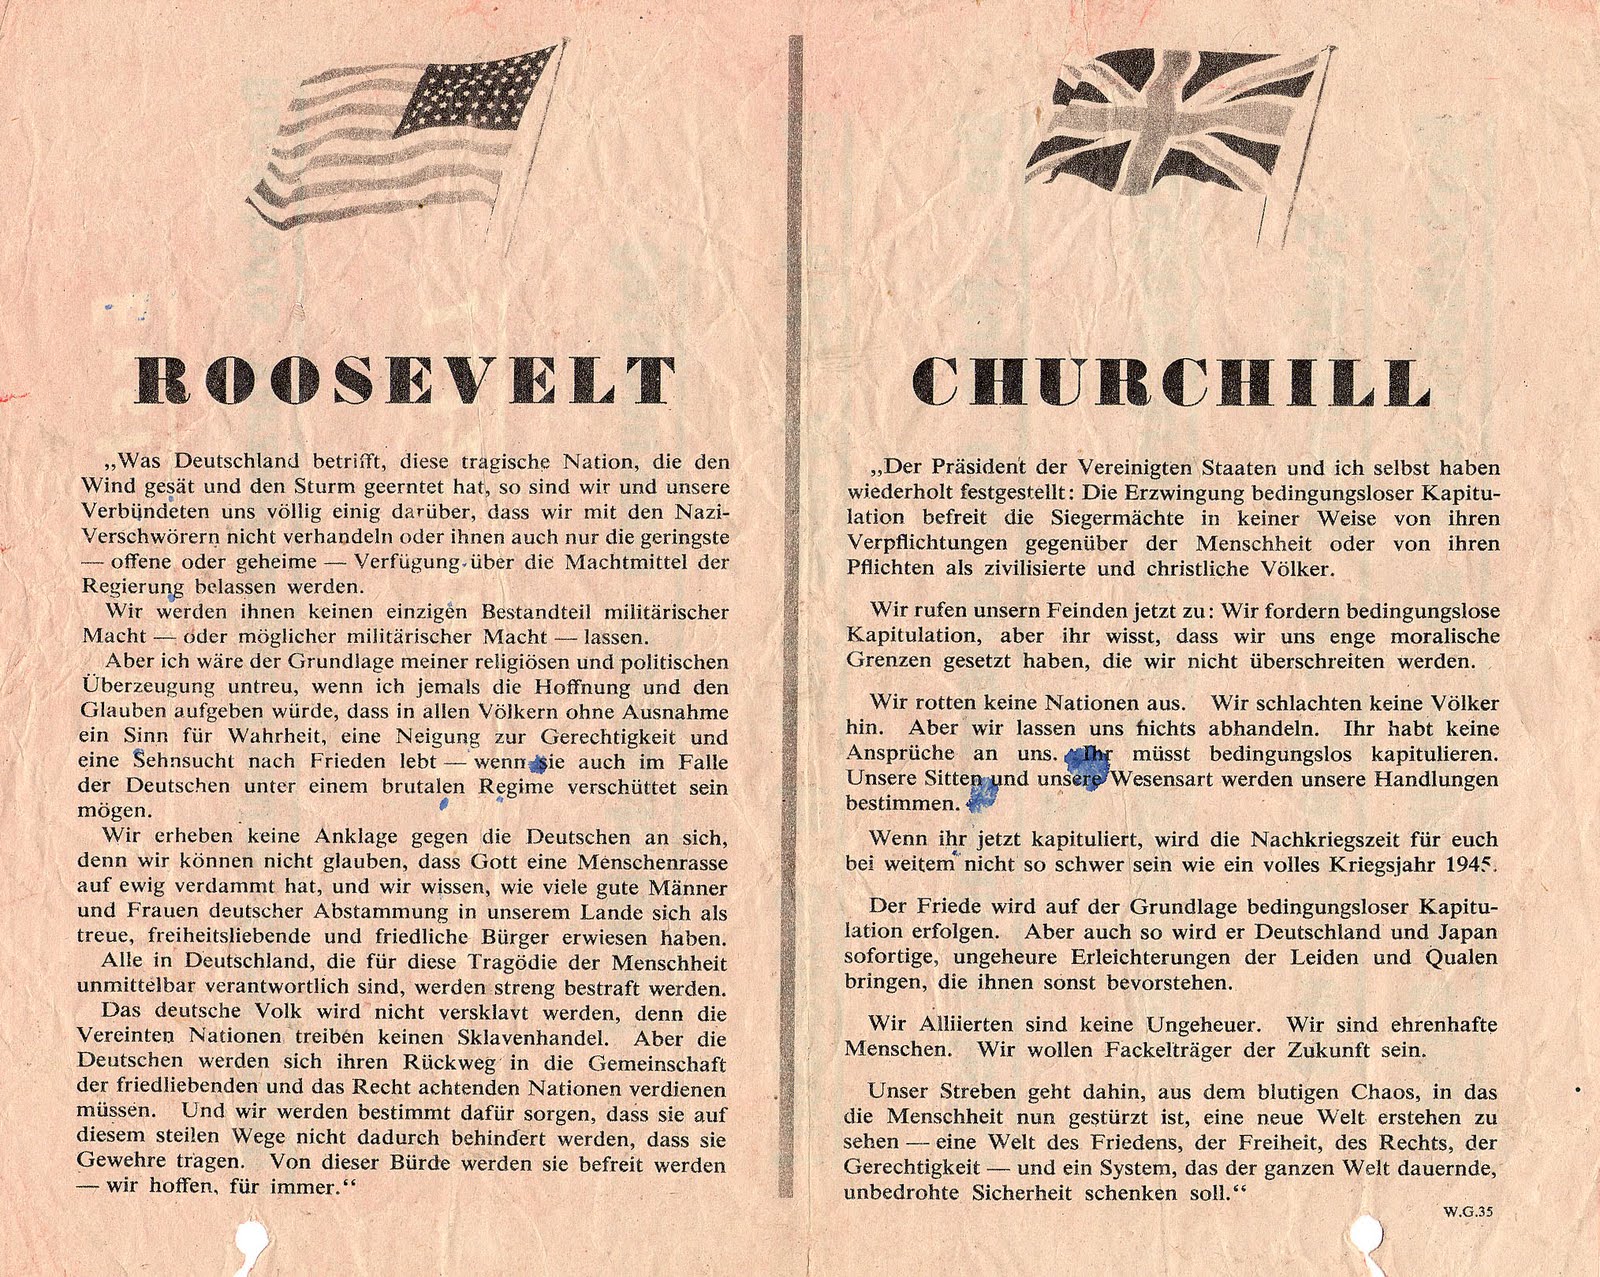 The back of the leaflet features two sections entitled “Roosevelt” and “Churchill” along with their national flags, and extols the social and political virtues of each nation’s system while simultaneously denigrating the dictatorial nature of the Third Reich. 